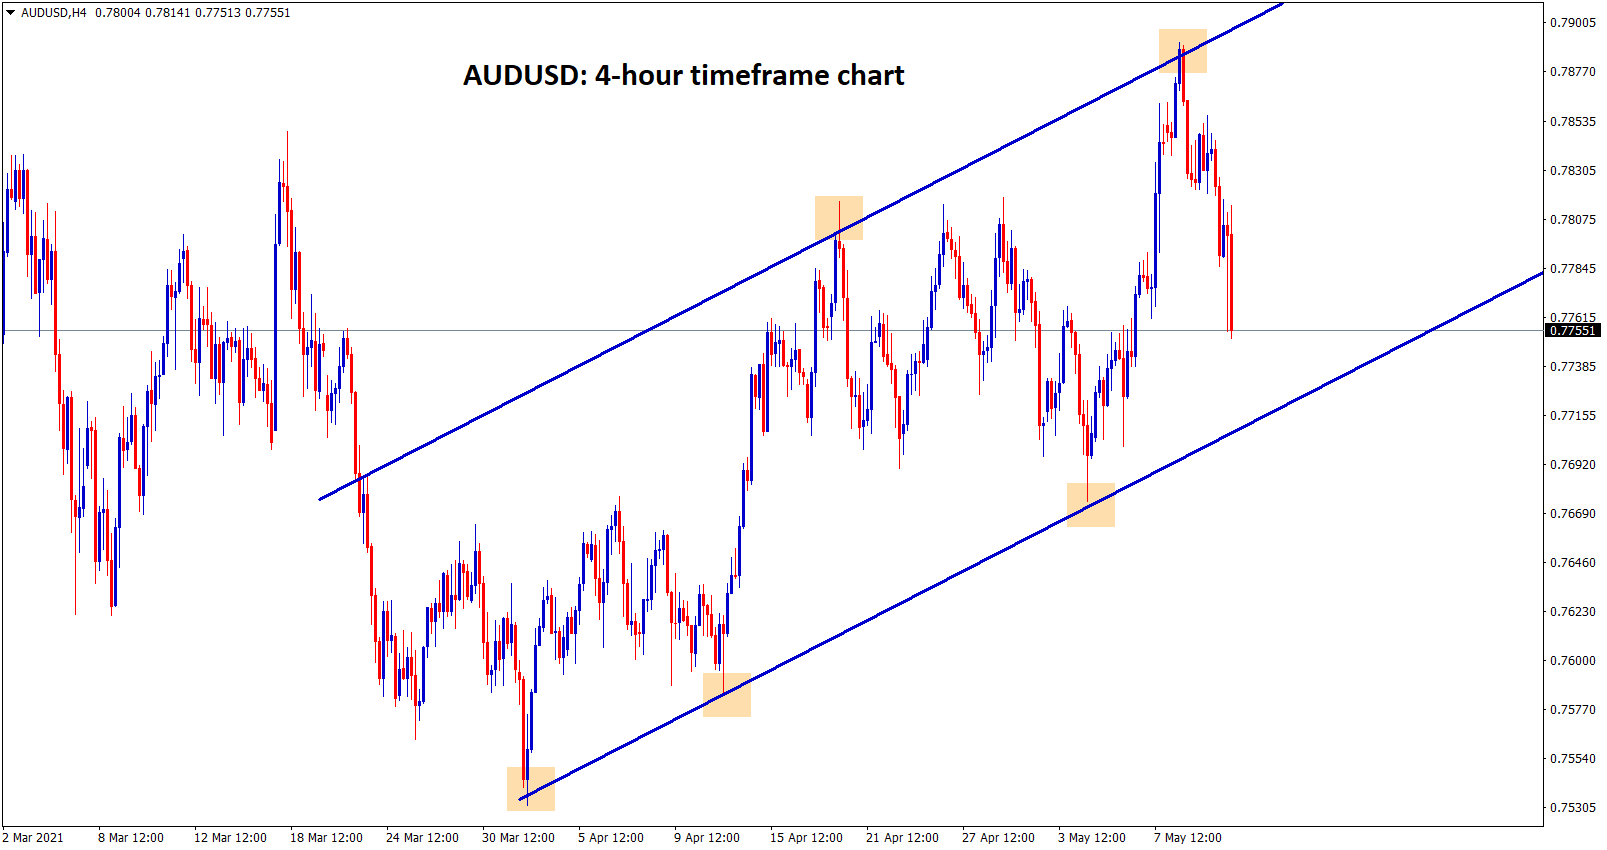 AUDUSD is moving in an ascending channel by forming higher highs and higher lows in the 4 hour timeframe chart.